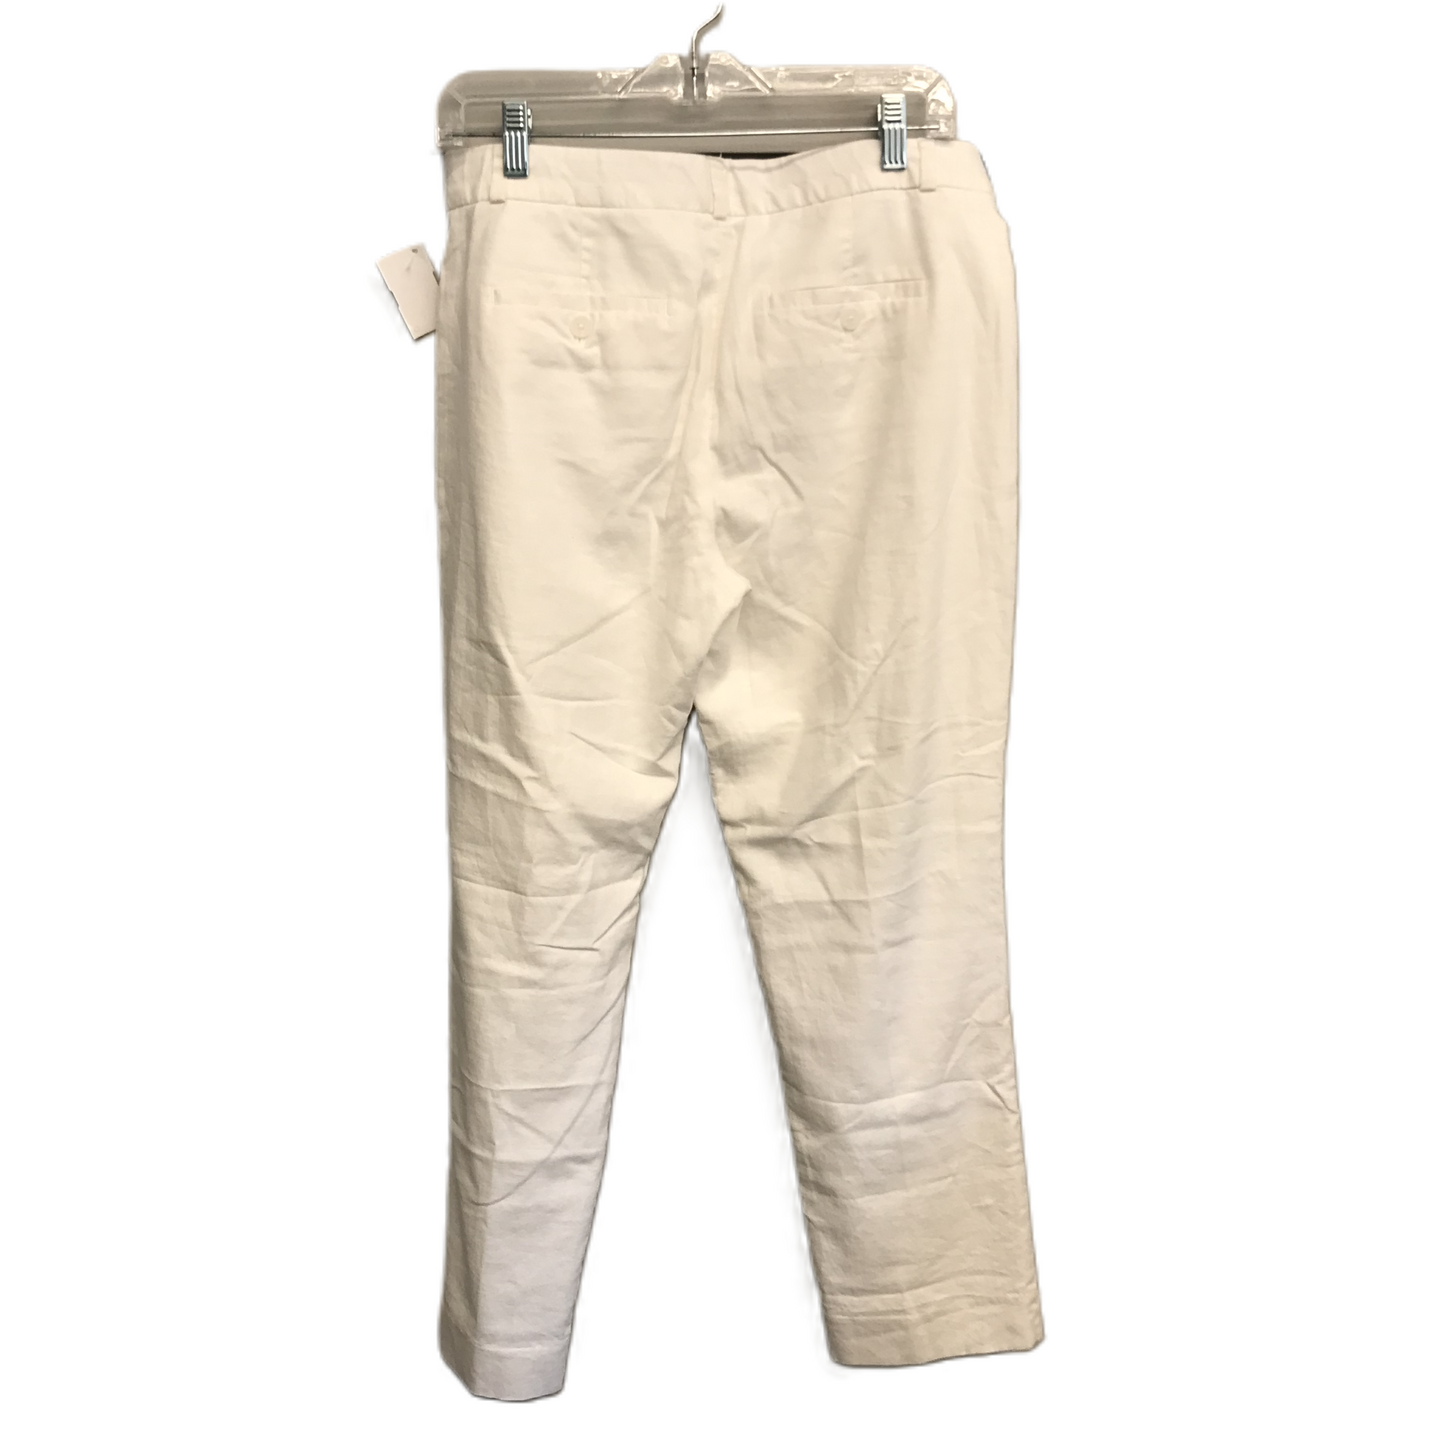 White Pants Other By Banana Republic, Size: 6